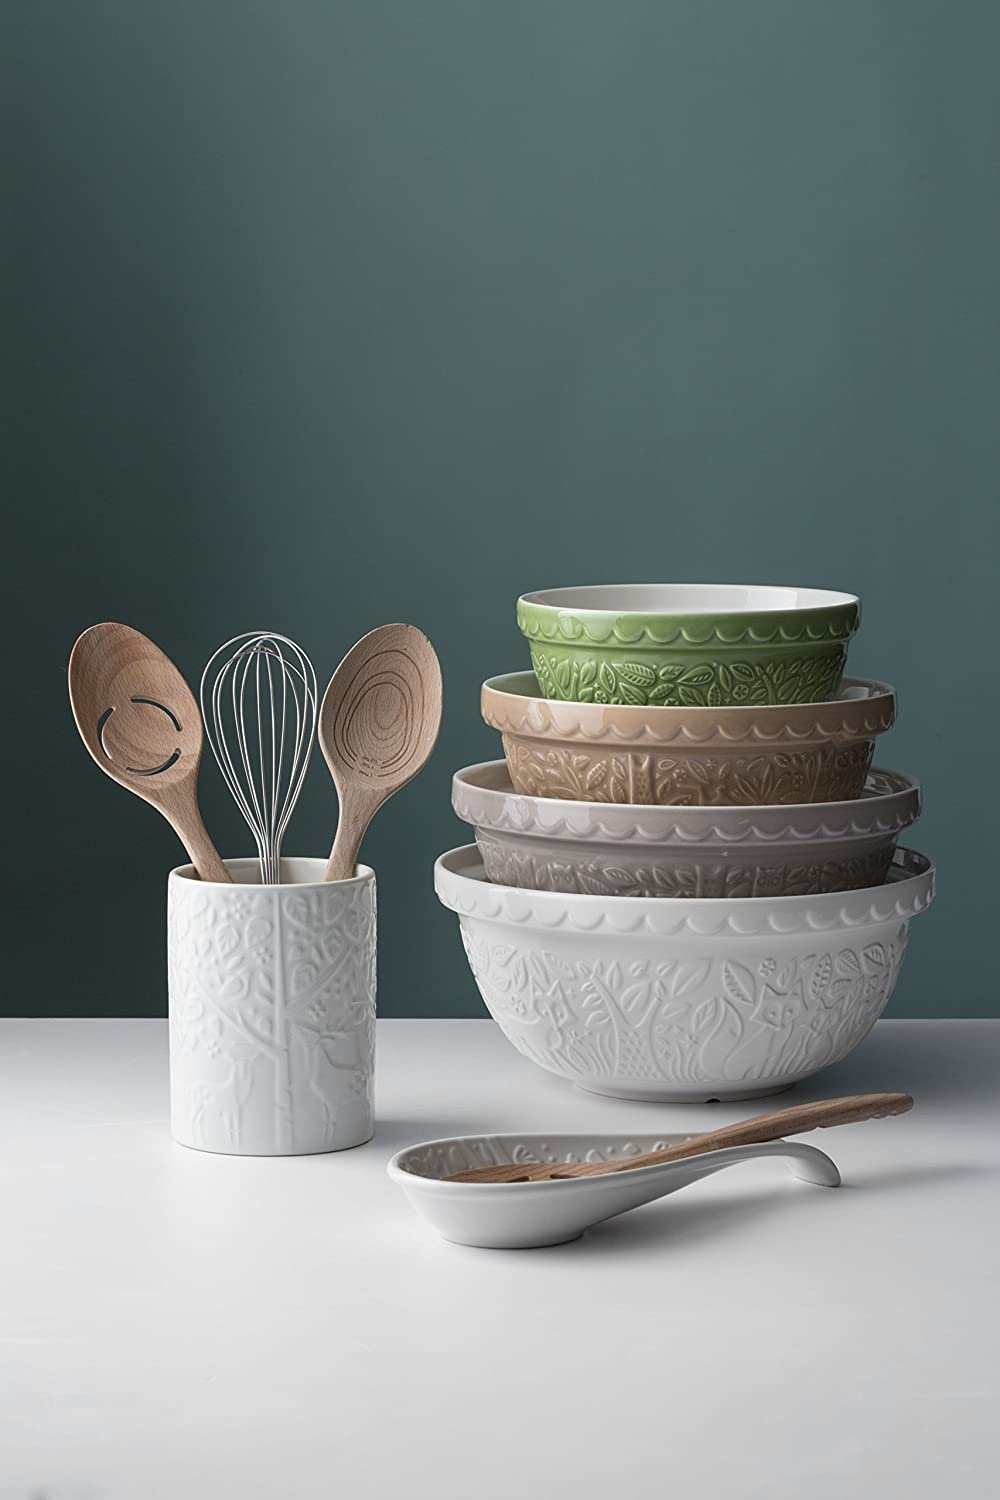 stack of bowls, crock with utensils, and spoon rest with spoon on white counter with grey background.